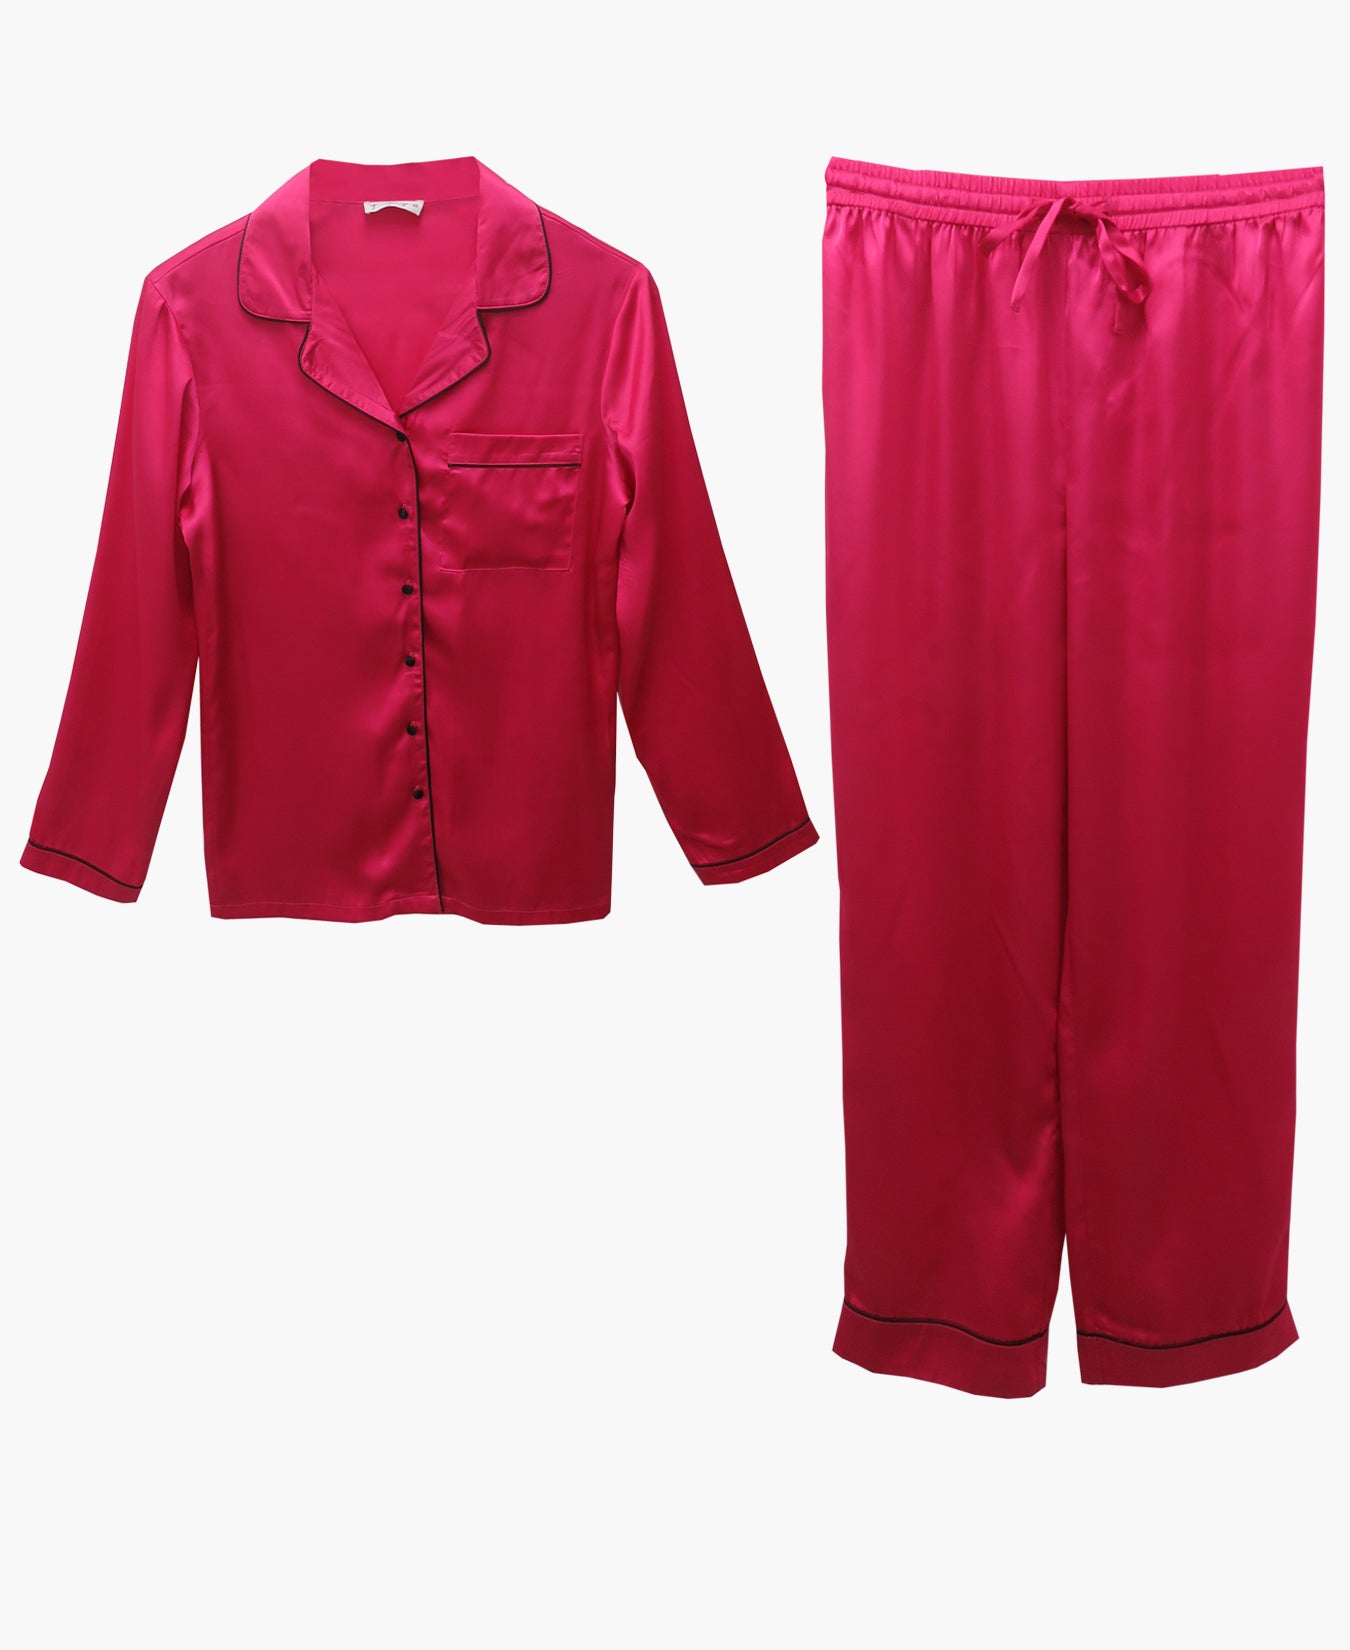 A GLAM PINK SATIN NIGHT SUIT WITH FULL SLEEVES, AND BLACK PIPING.